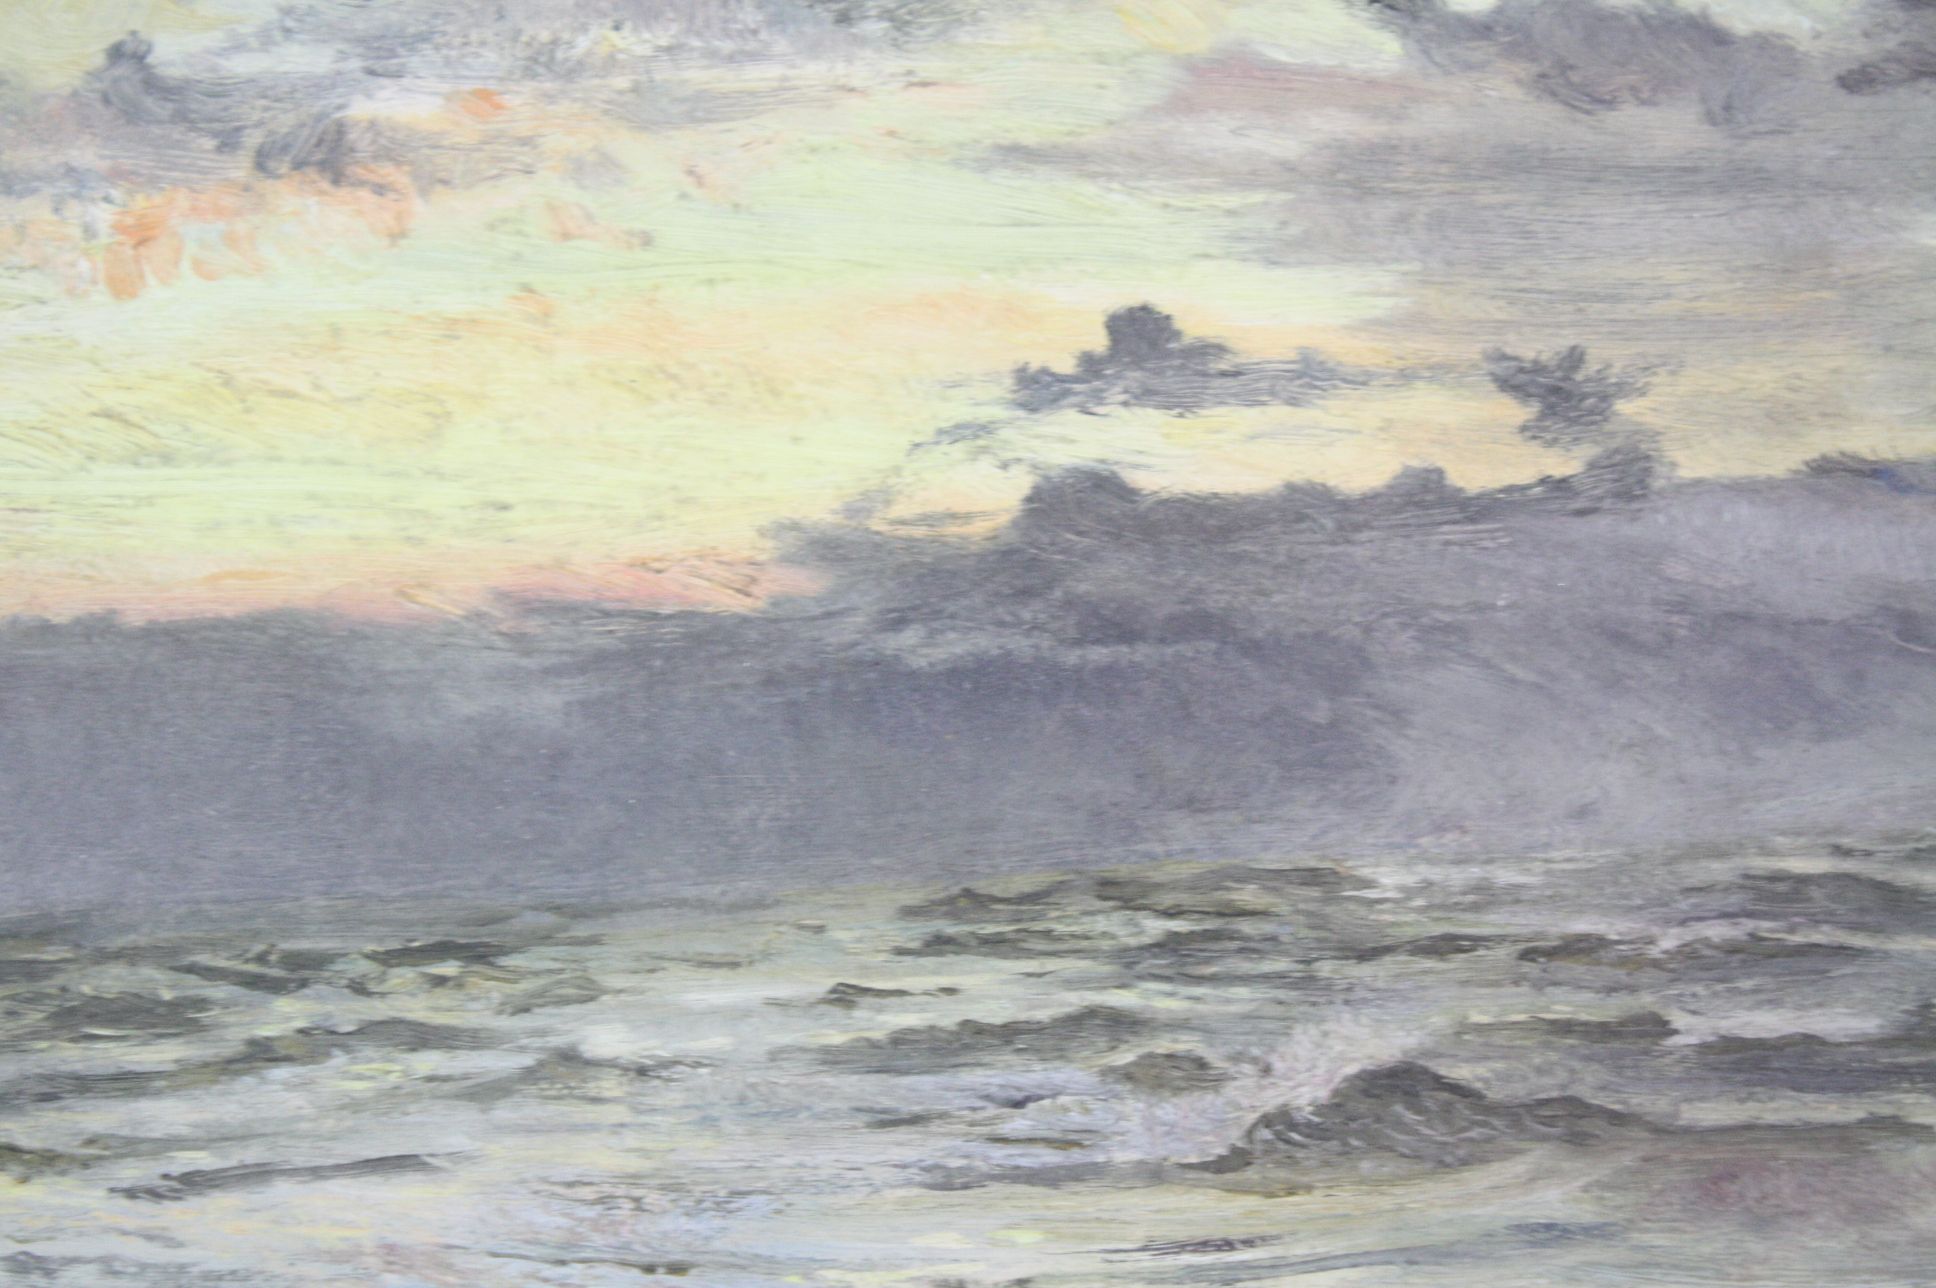 William Lionel Wyllie (1851-1931) A study of sea and sky, Oil on artists board, Approx 13 x 19. - Image 3 of 5